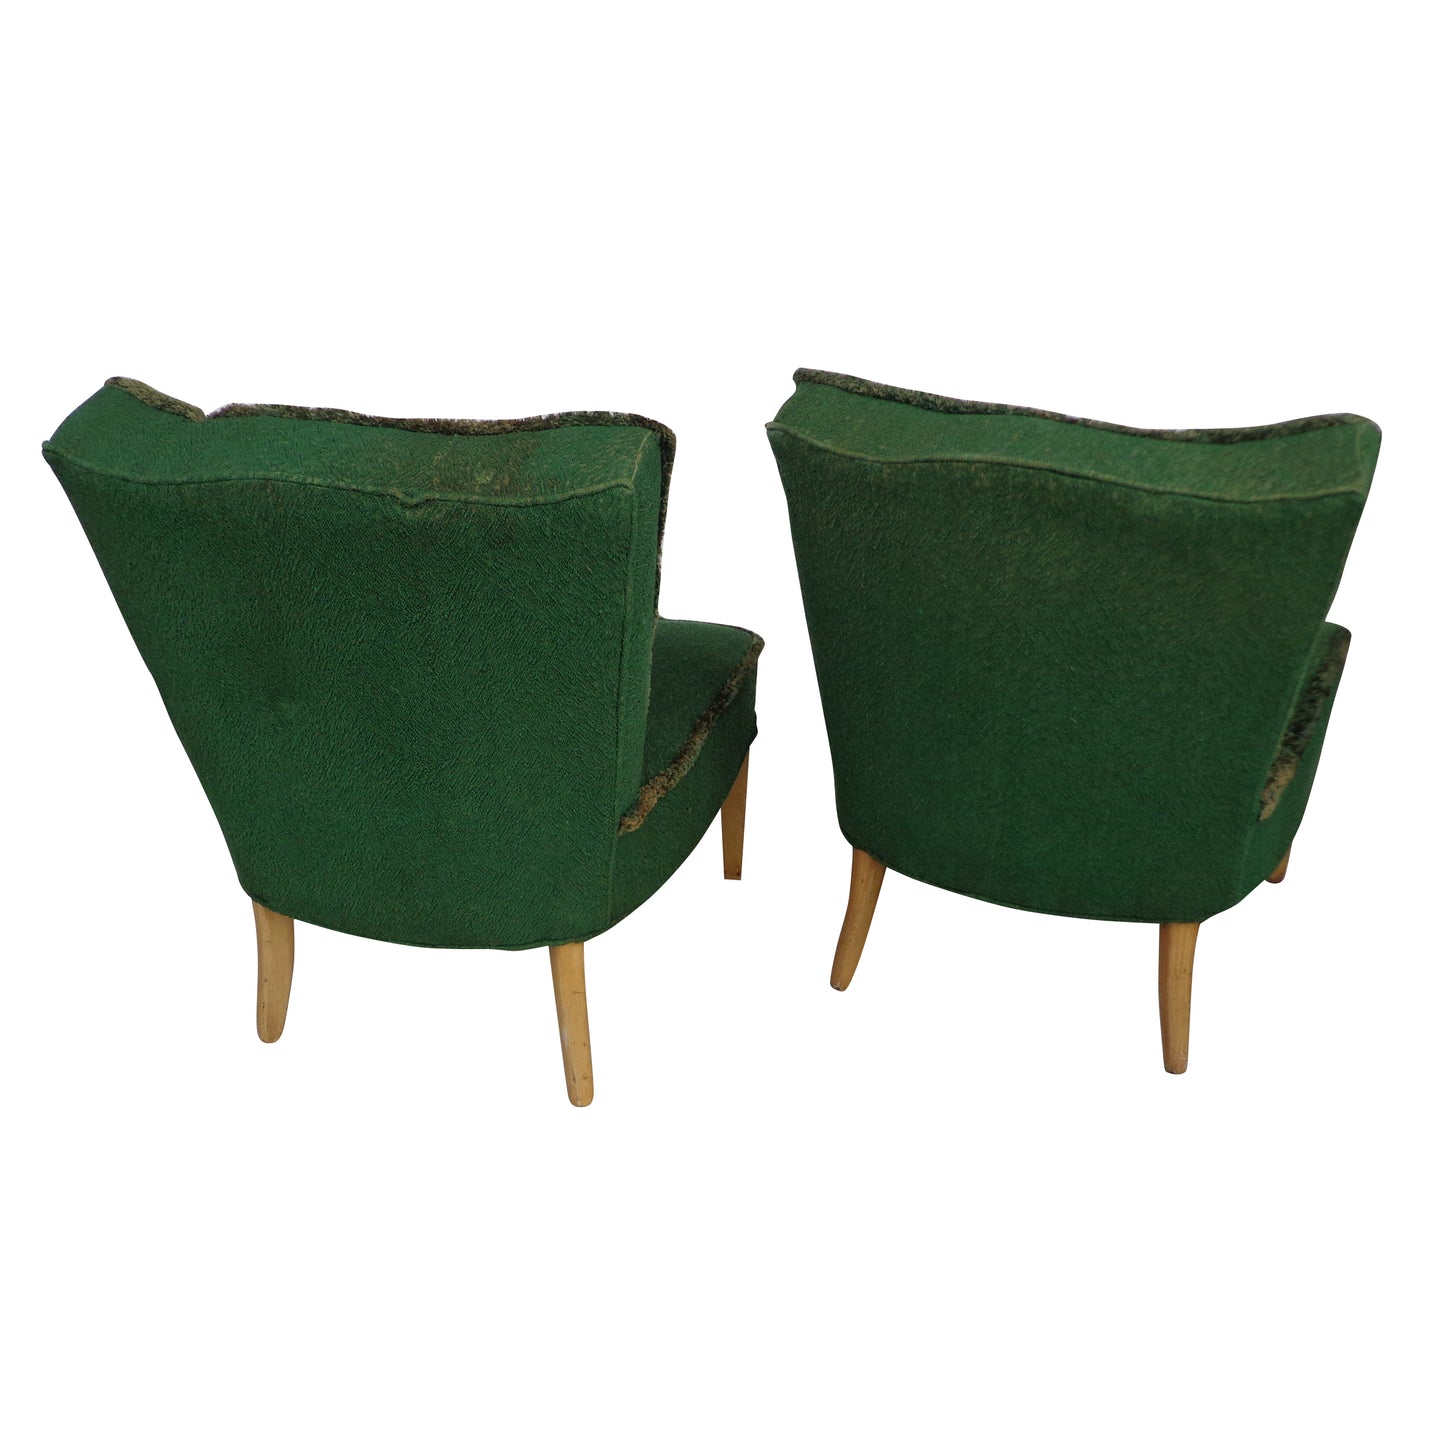 Pair of Vintage Lounge Chairs with Horse Hair Cushions